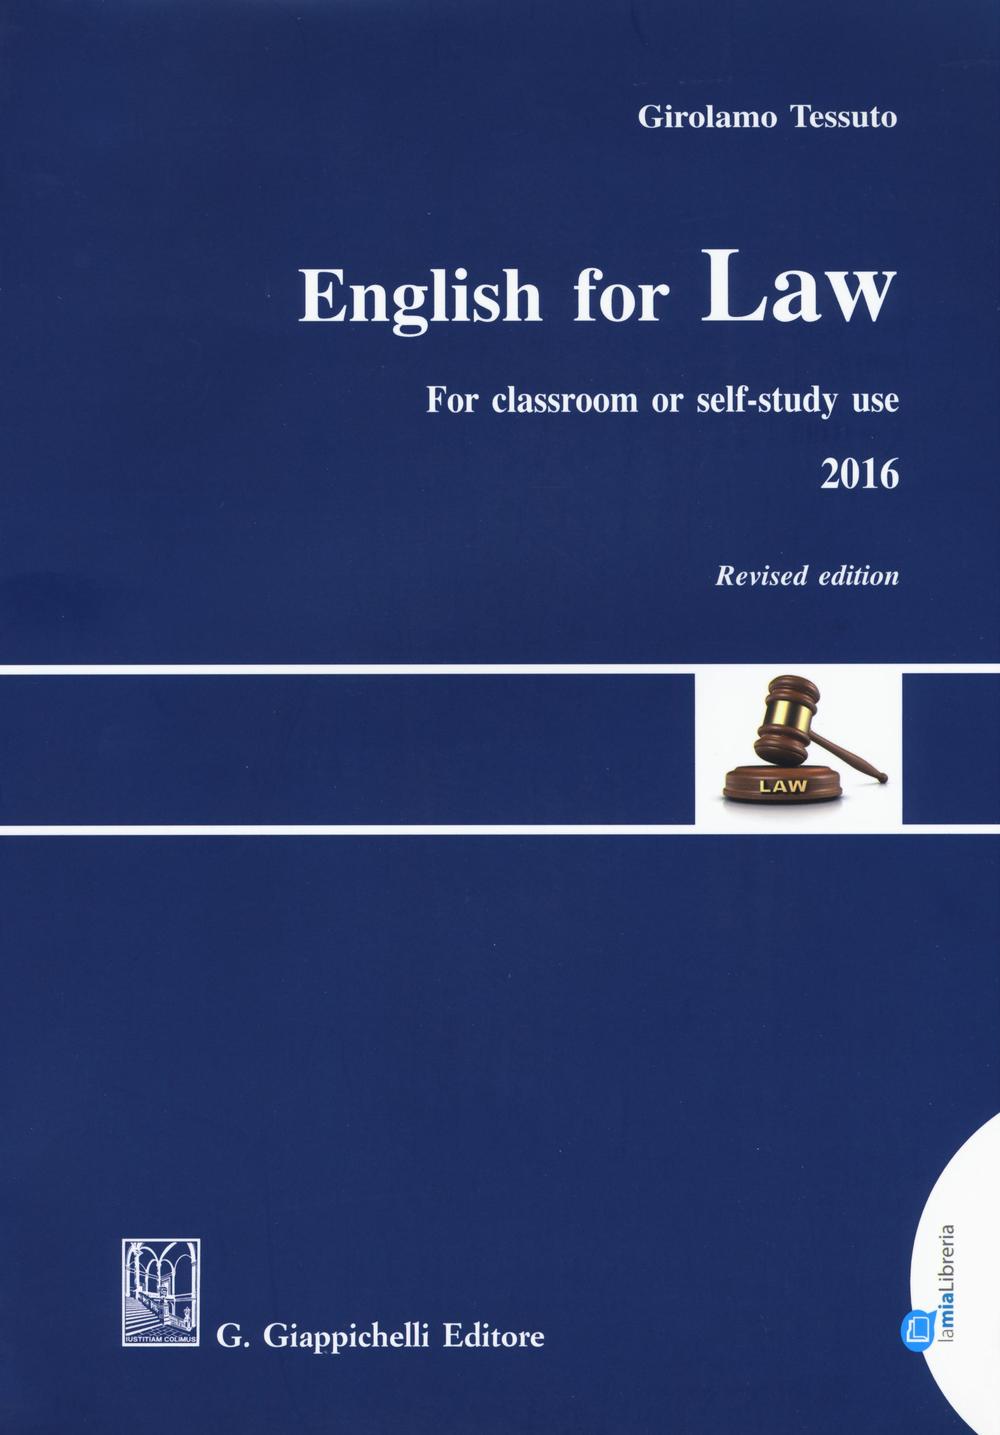 English for law. For classroom or self-study use 2016